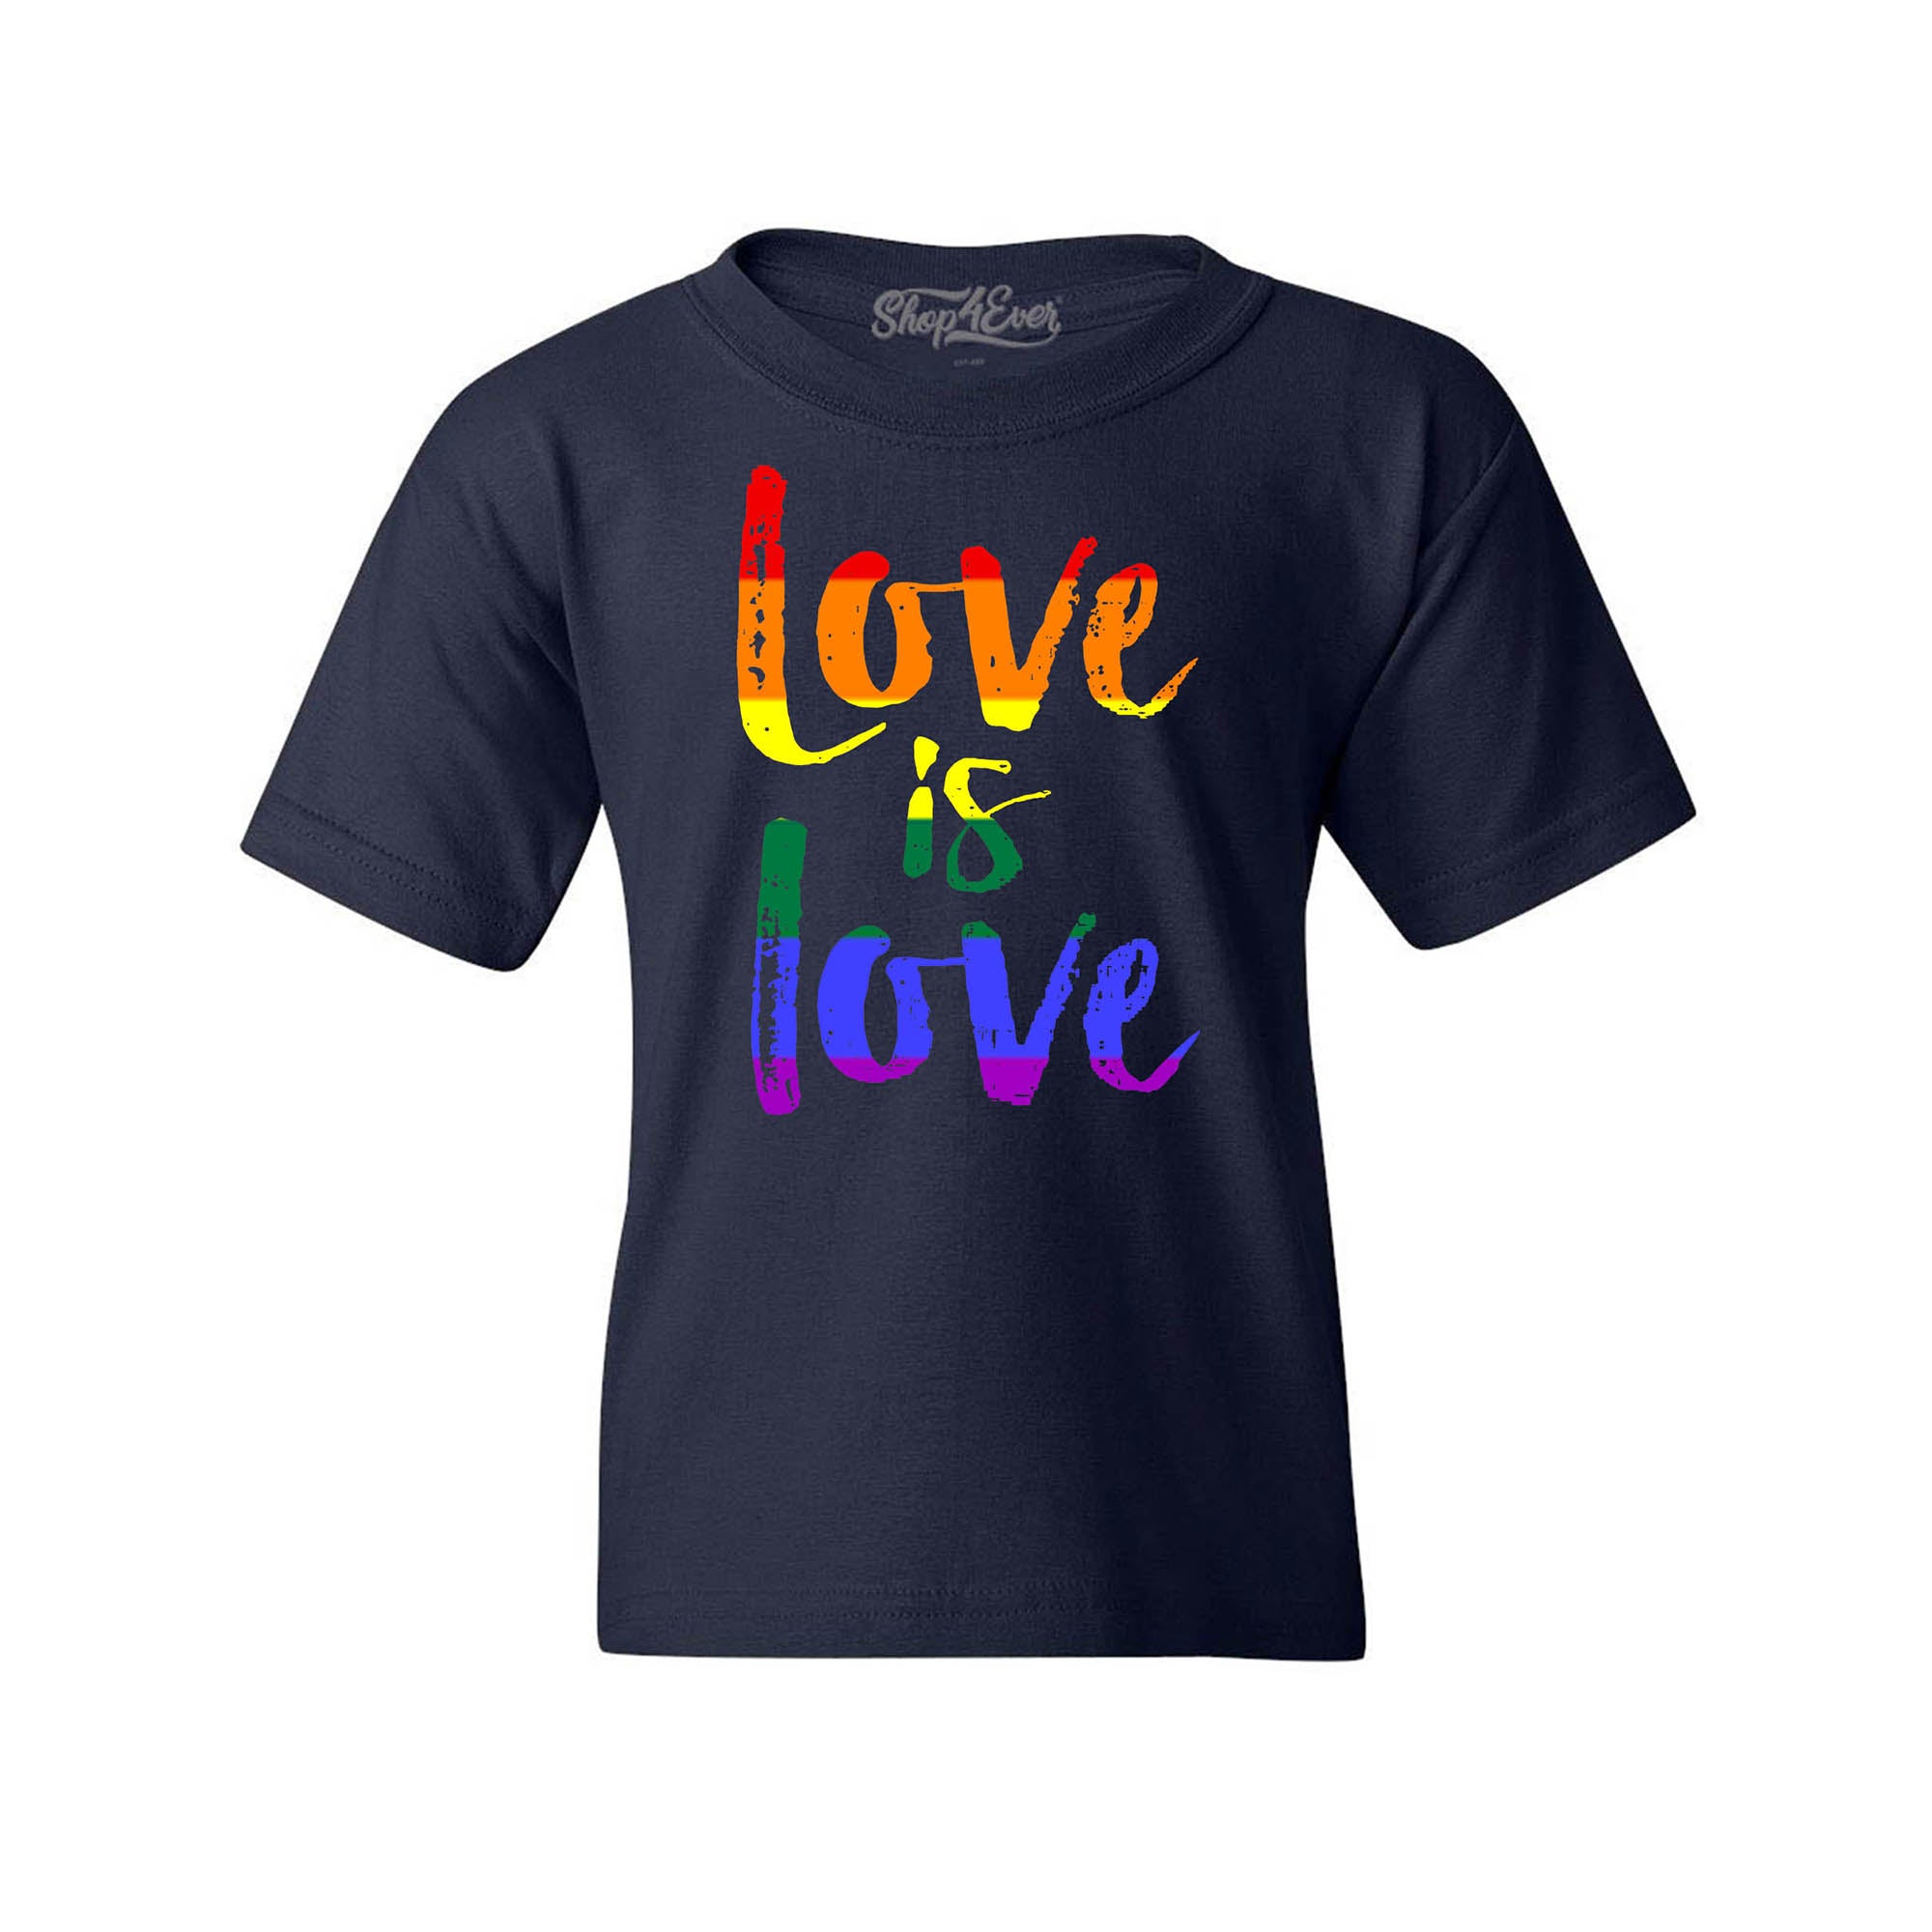 Love is Love Youth's T-Shirt Gay Pride Child Kids Shirts